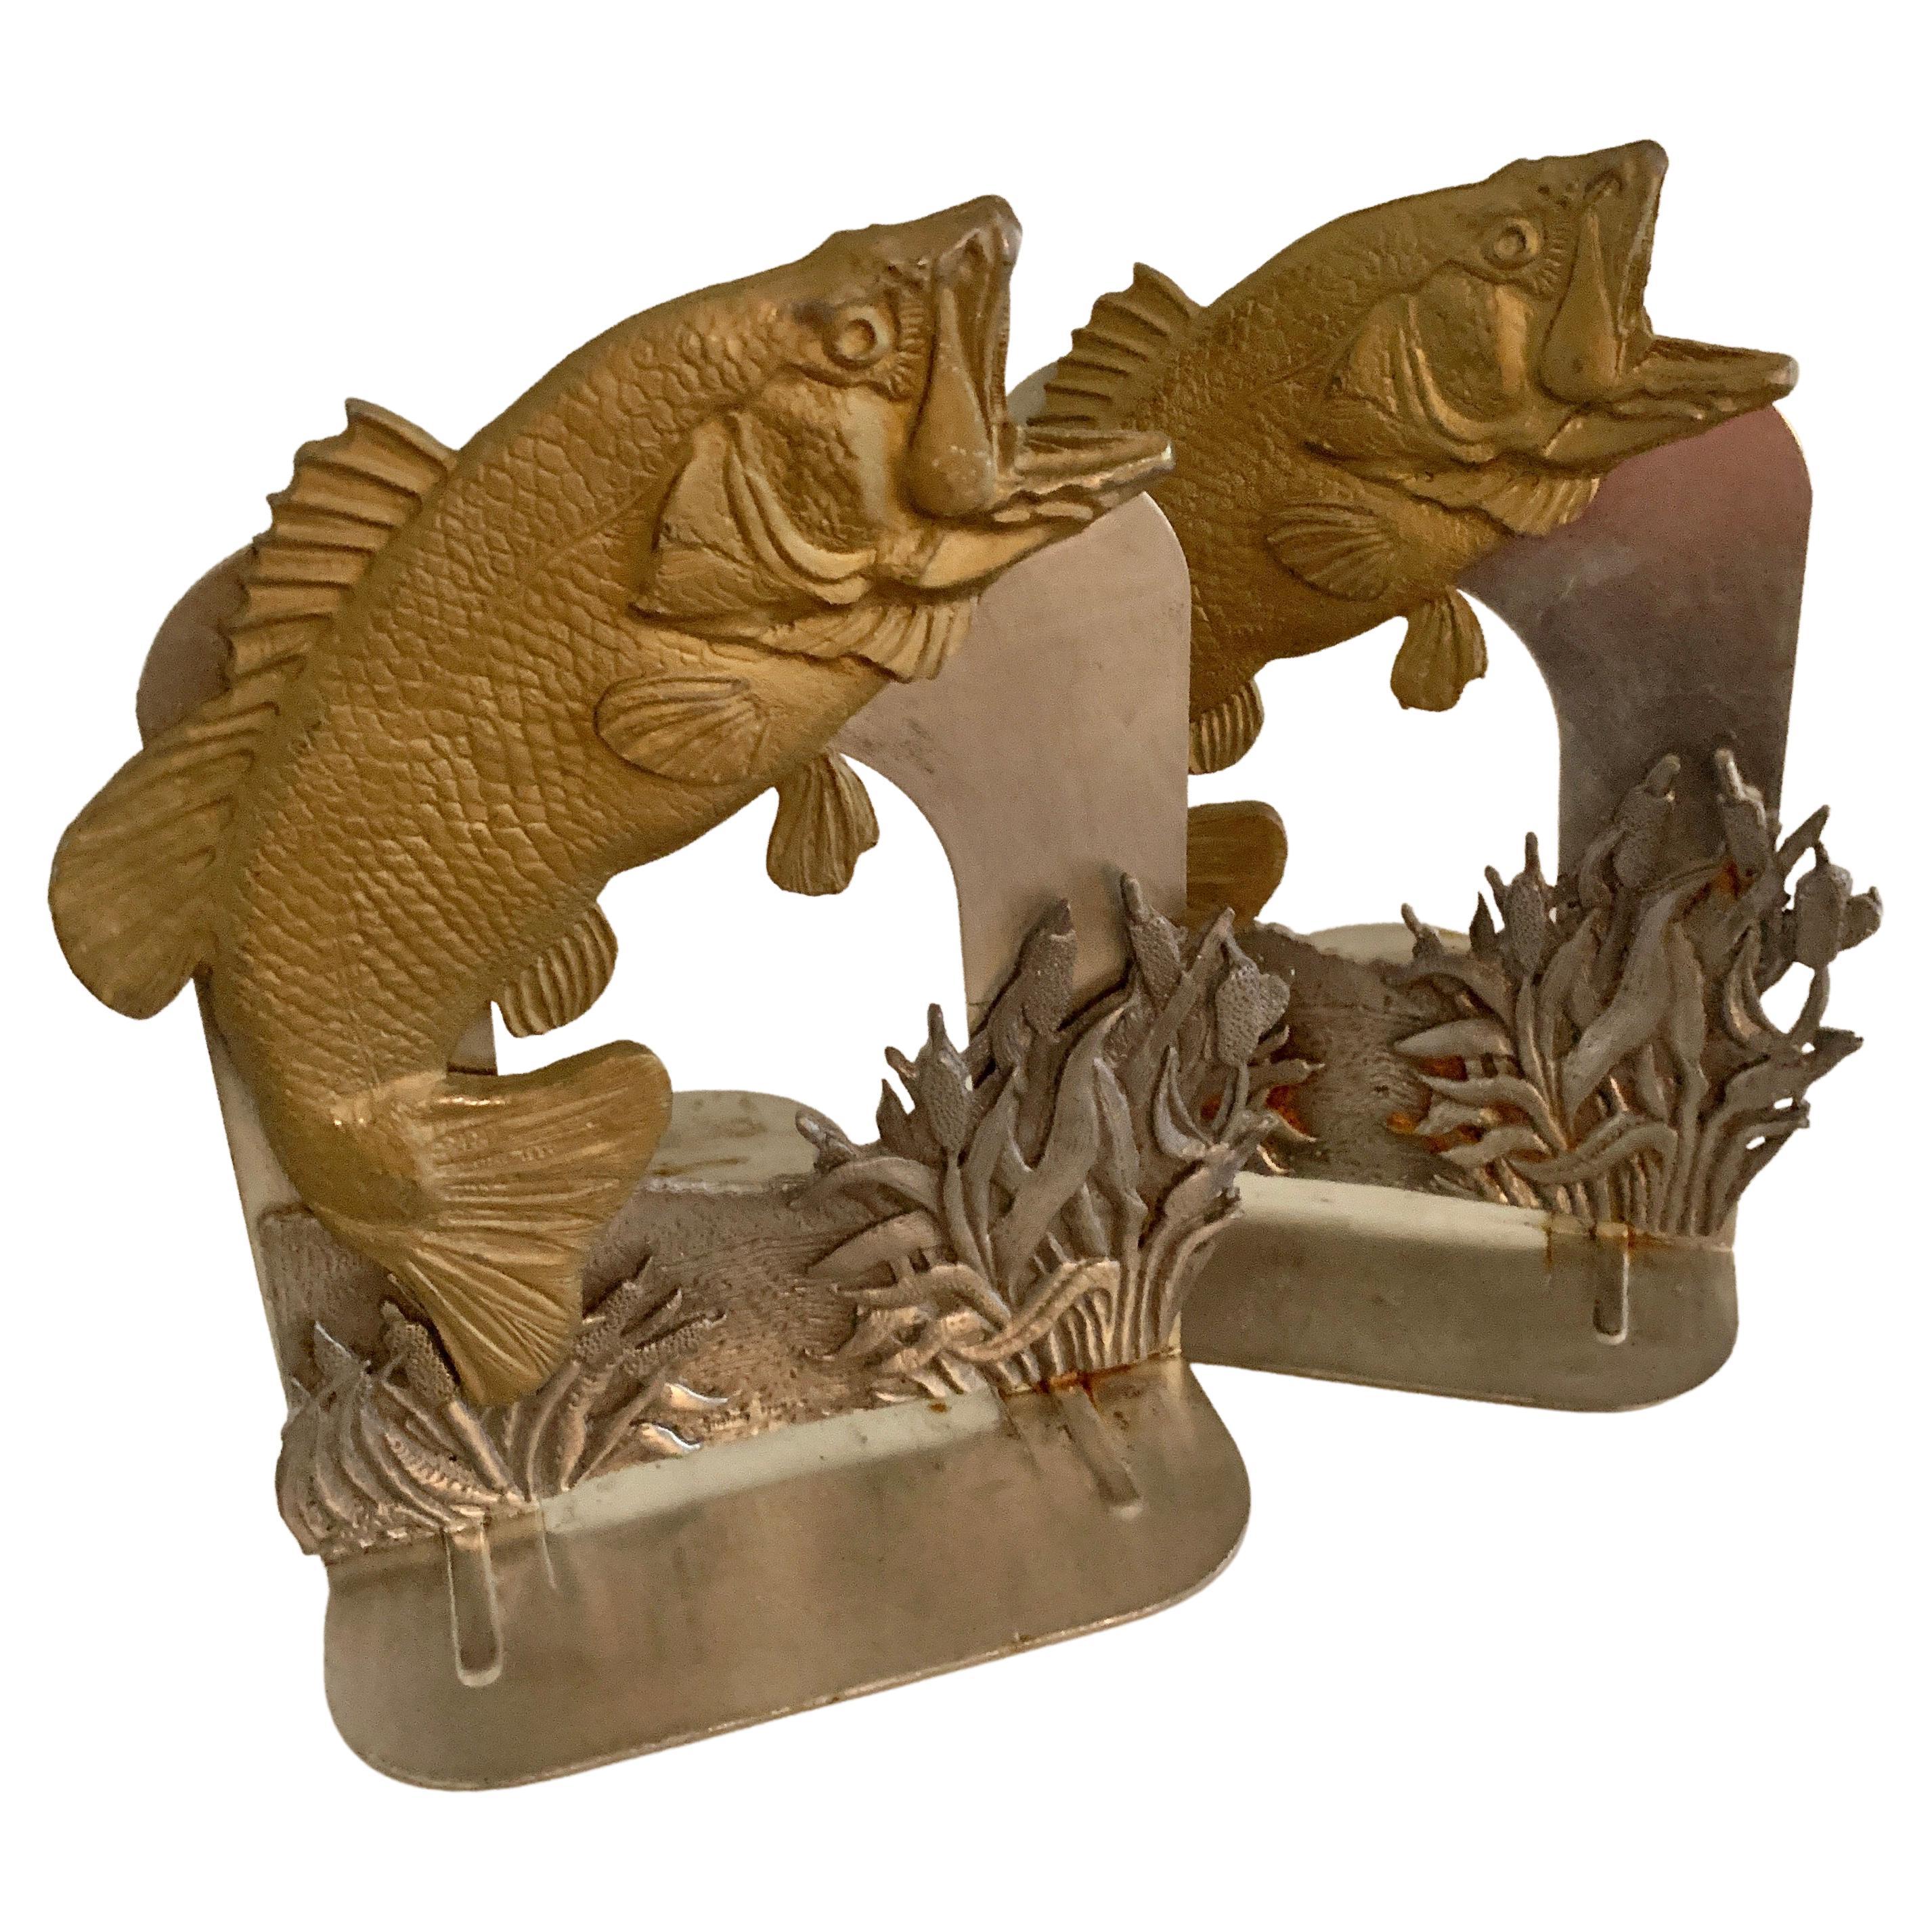 Pair of Jumping Fish Bookends